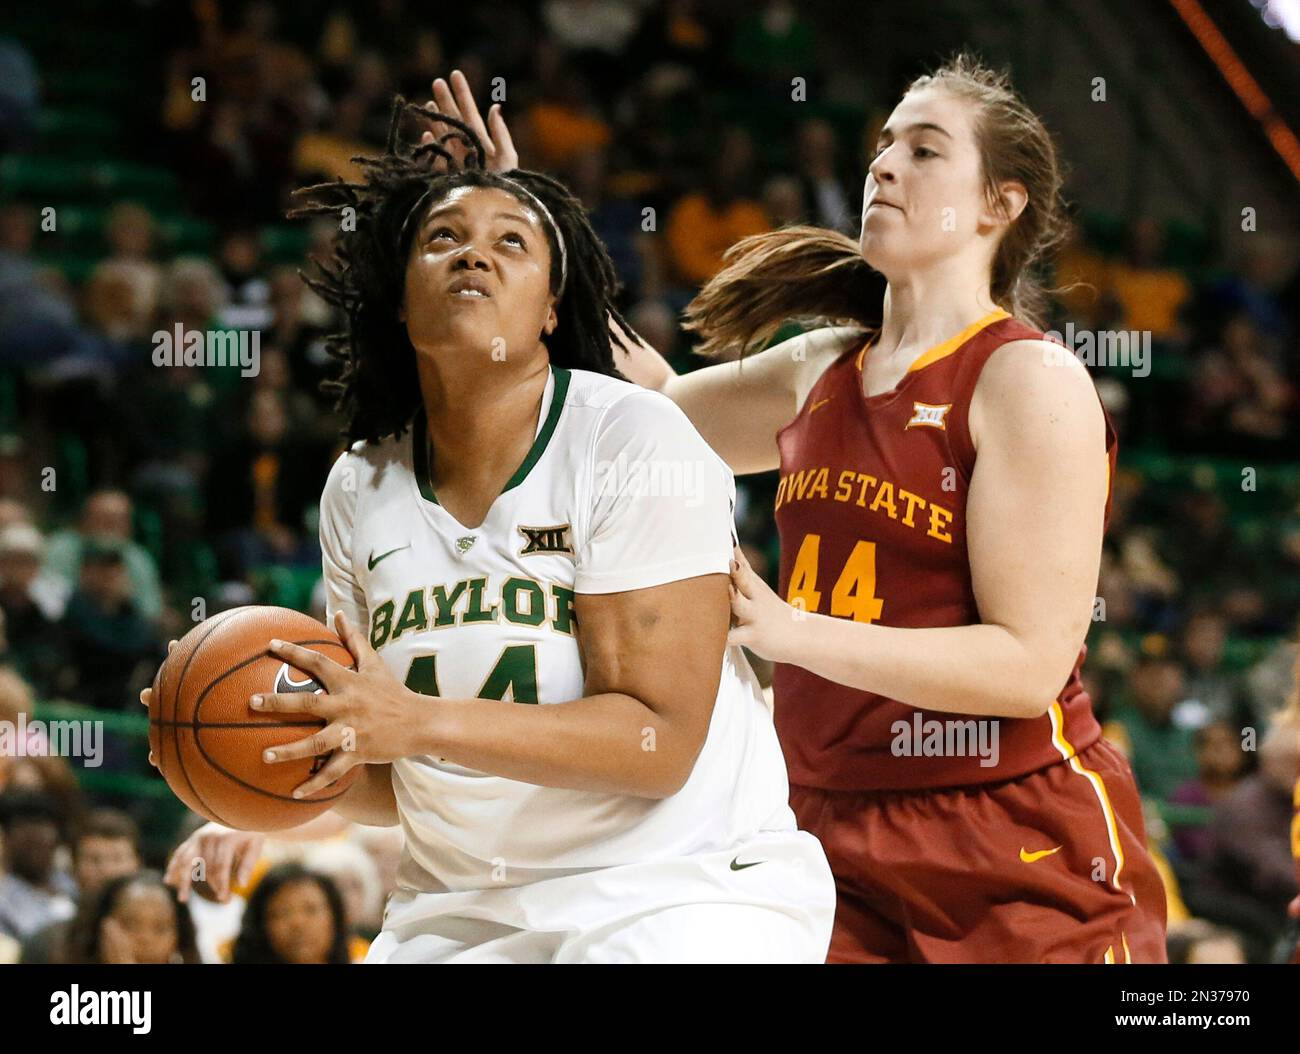 Baylor's Kristina Higgins, left, positions for a shot against Iowa State's  Bryanna Fernstrom, right, during an NCAA college basketball game, Tuesday,  Jan. 13, 2015, in Waco, Texas. (AP Photo/Tony Gutierrez Stock Photo -